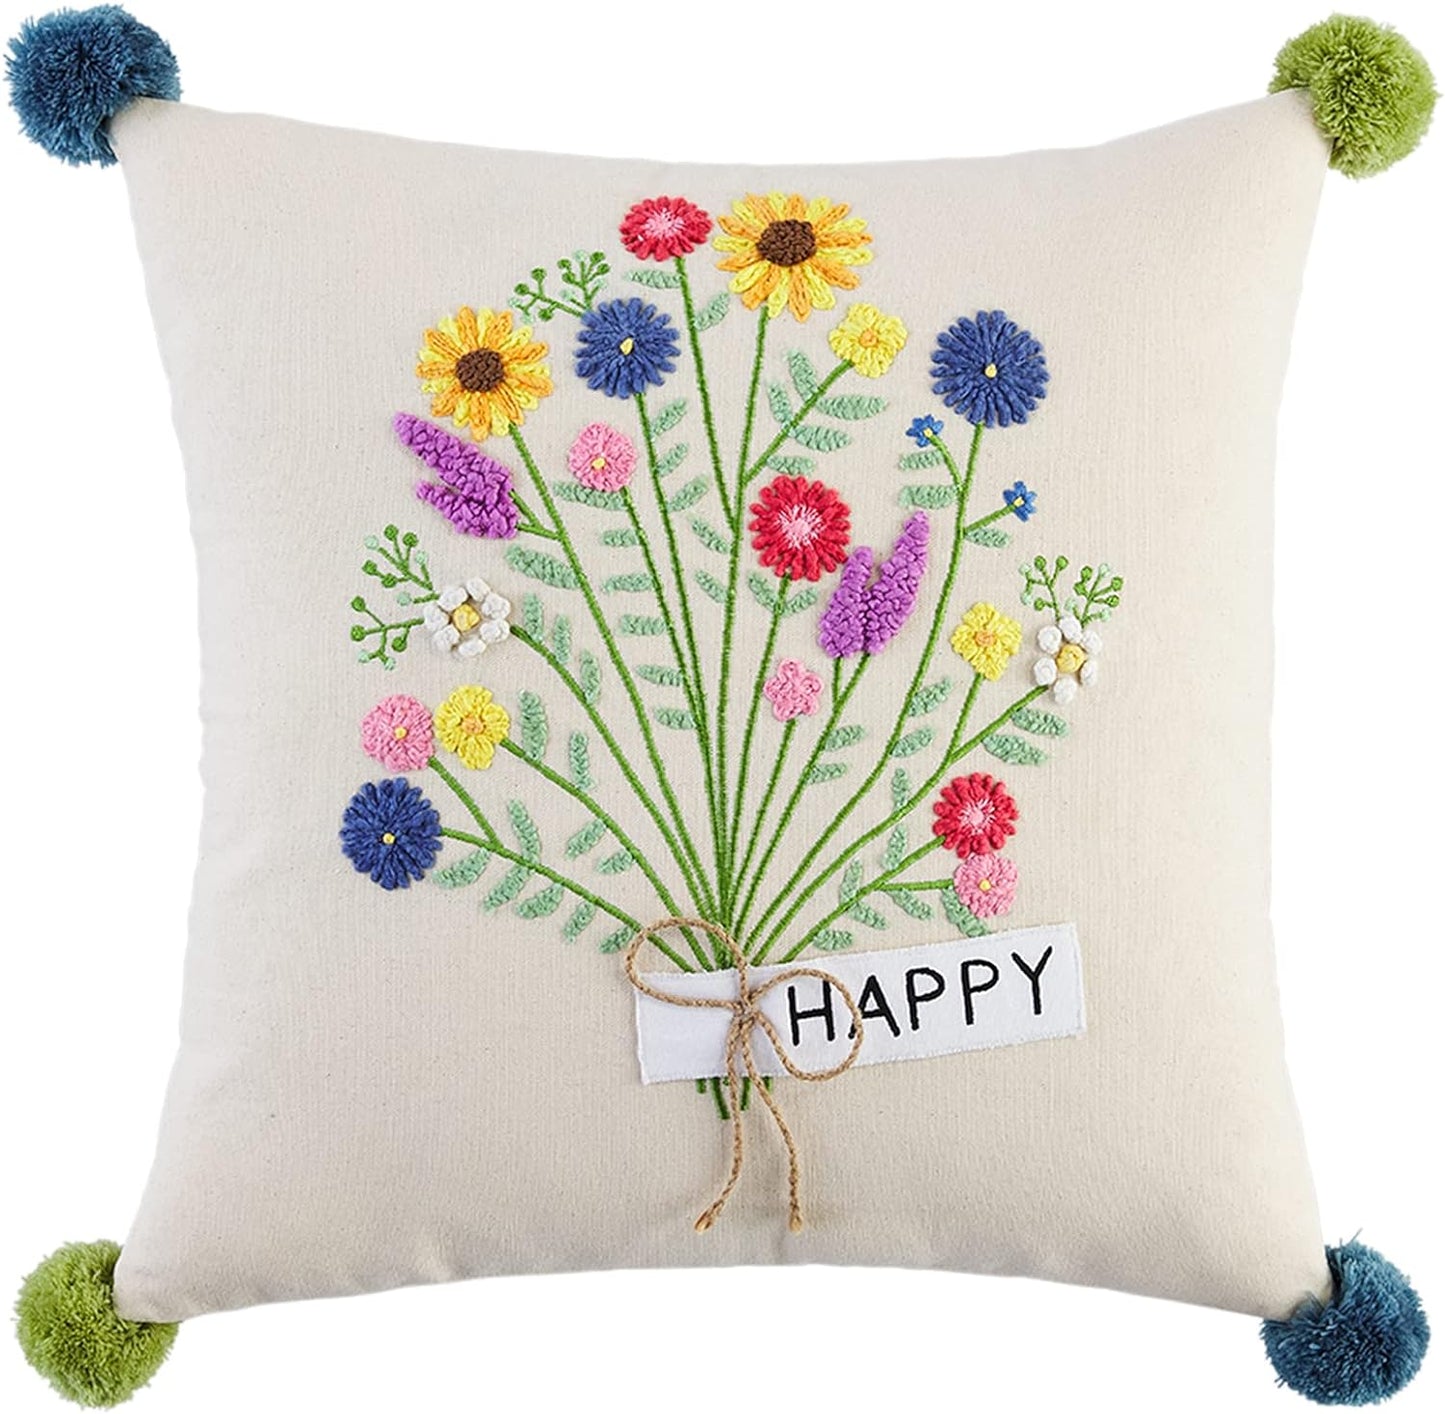 happy pillow with a bouquet of embordered pillows tied witha tag printed "happy" with blue and green poms in each corner.